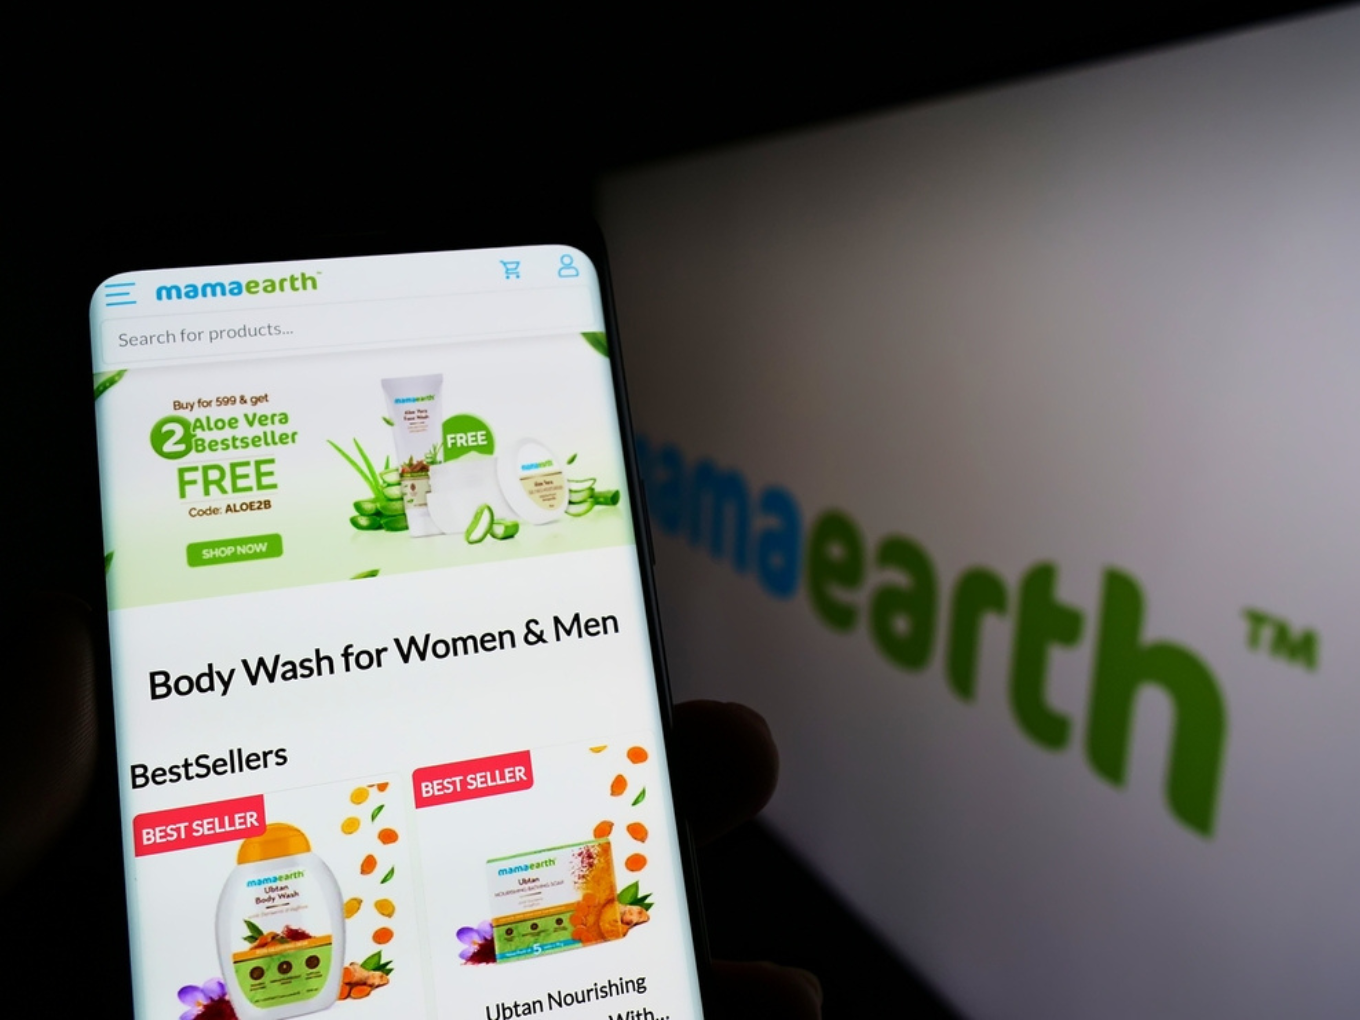 mamaearth: Personal care brand Mamaearth gets set for renewed overseas push  - The Economic Times